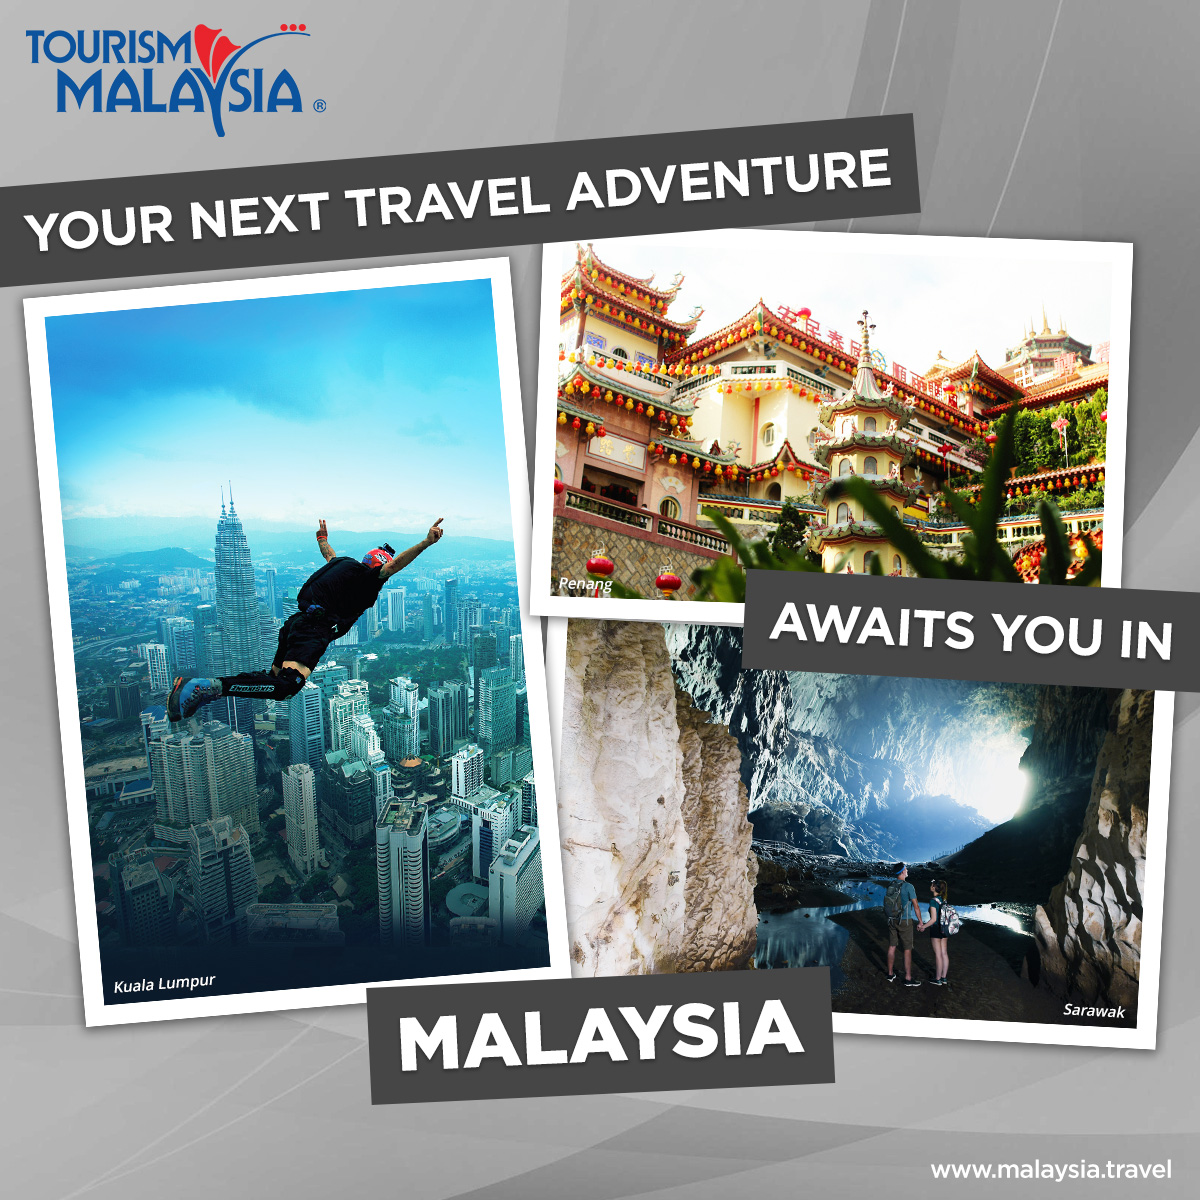 🚨 We're going on an adventure to a destination where discoveries are endless and the experience? Malaysia Truly Asia. 👏

In collaboration with @TourismMalaysia, we'll unlock Malaysia's memories to last a lifetime. 🤩 Stay tuned!

#MalaysiaTrulyAsia #VisitMalaysia2026